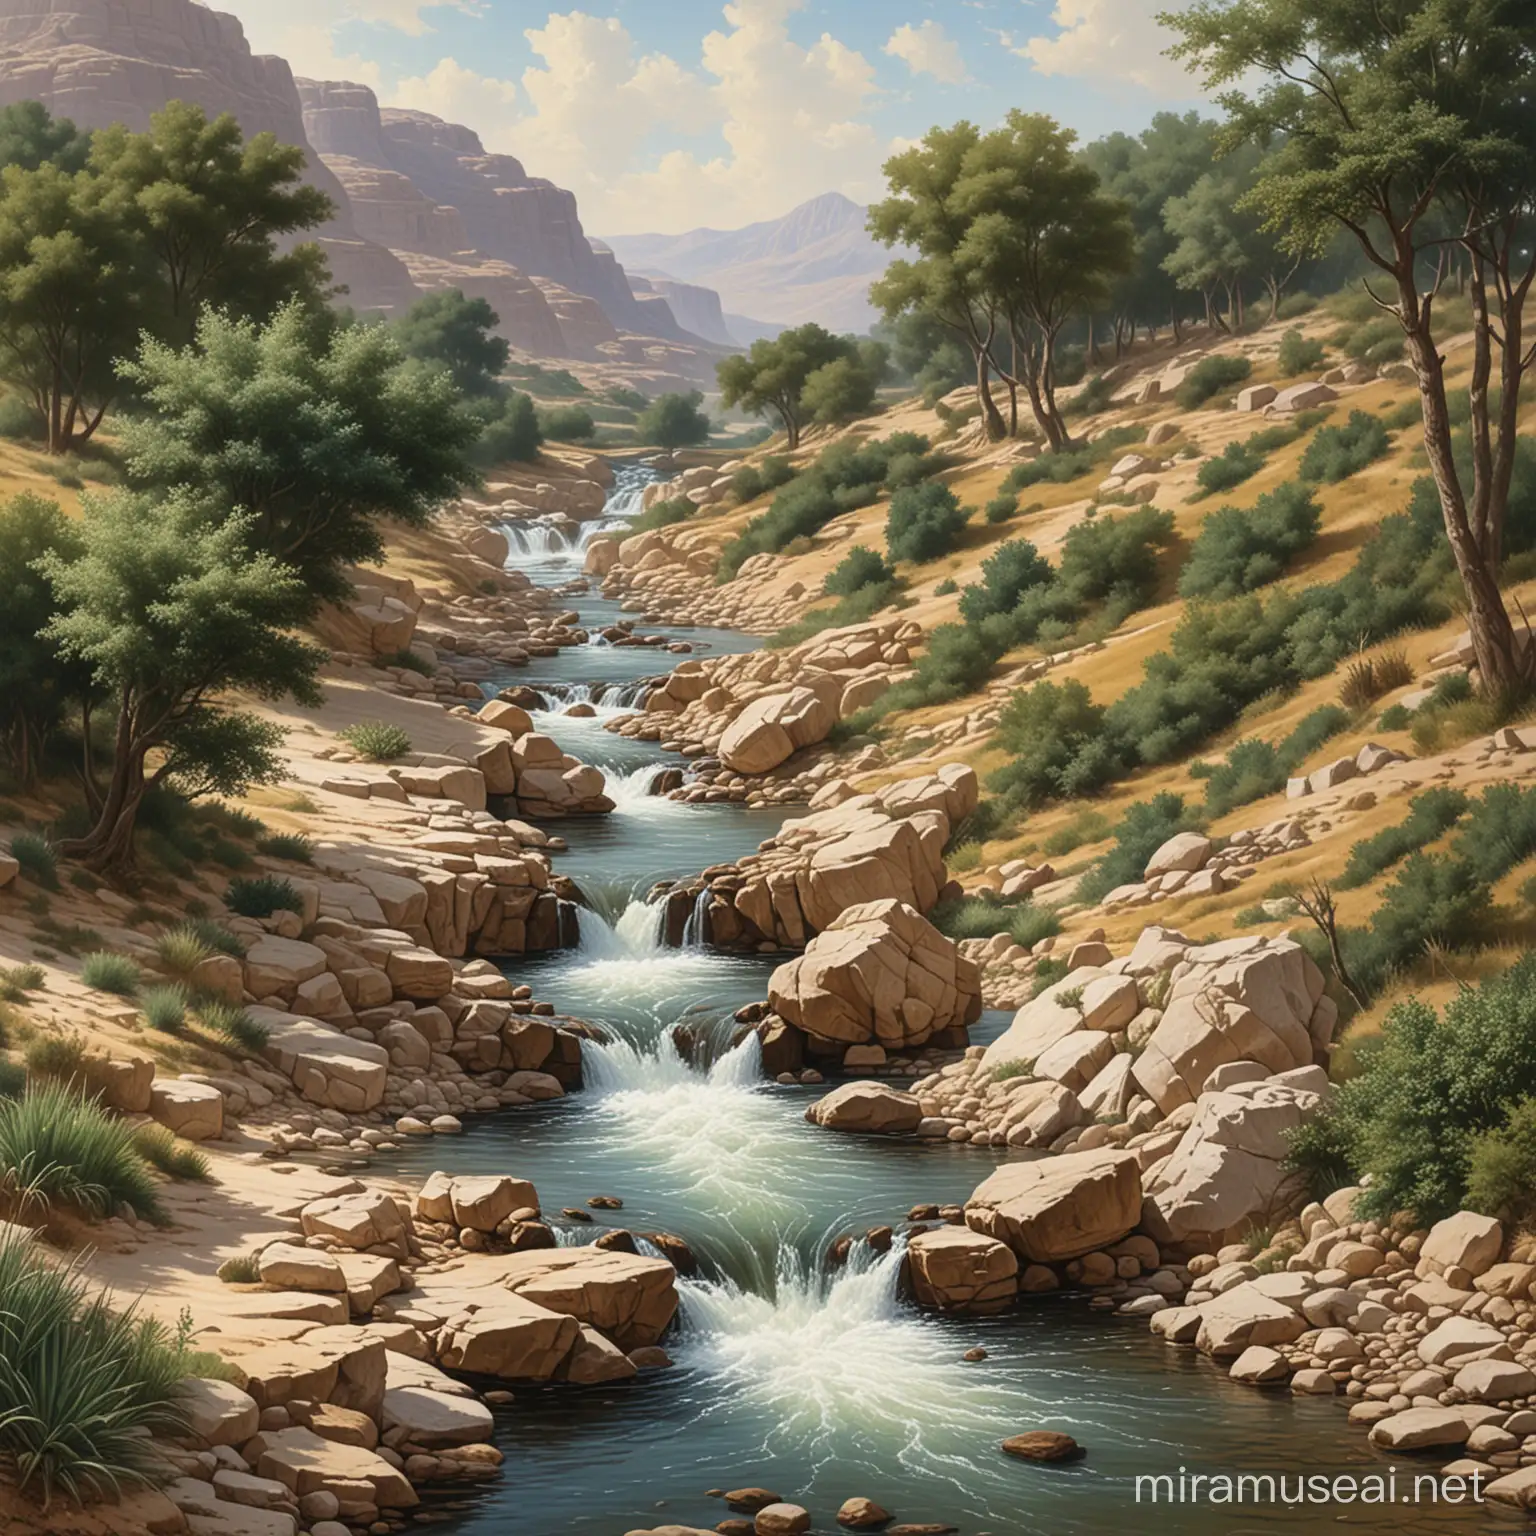 The image depicts a river with a small waterfall in a natural outdoor setting.For, lo, I raise up the Chaldeans, that bitter and hasty nation, which shall march through the breadth of the land, to possess the dwellingplaces that are not their's